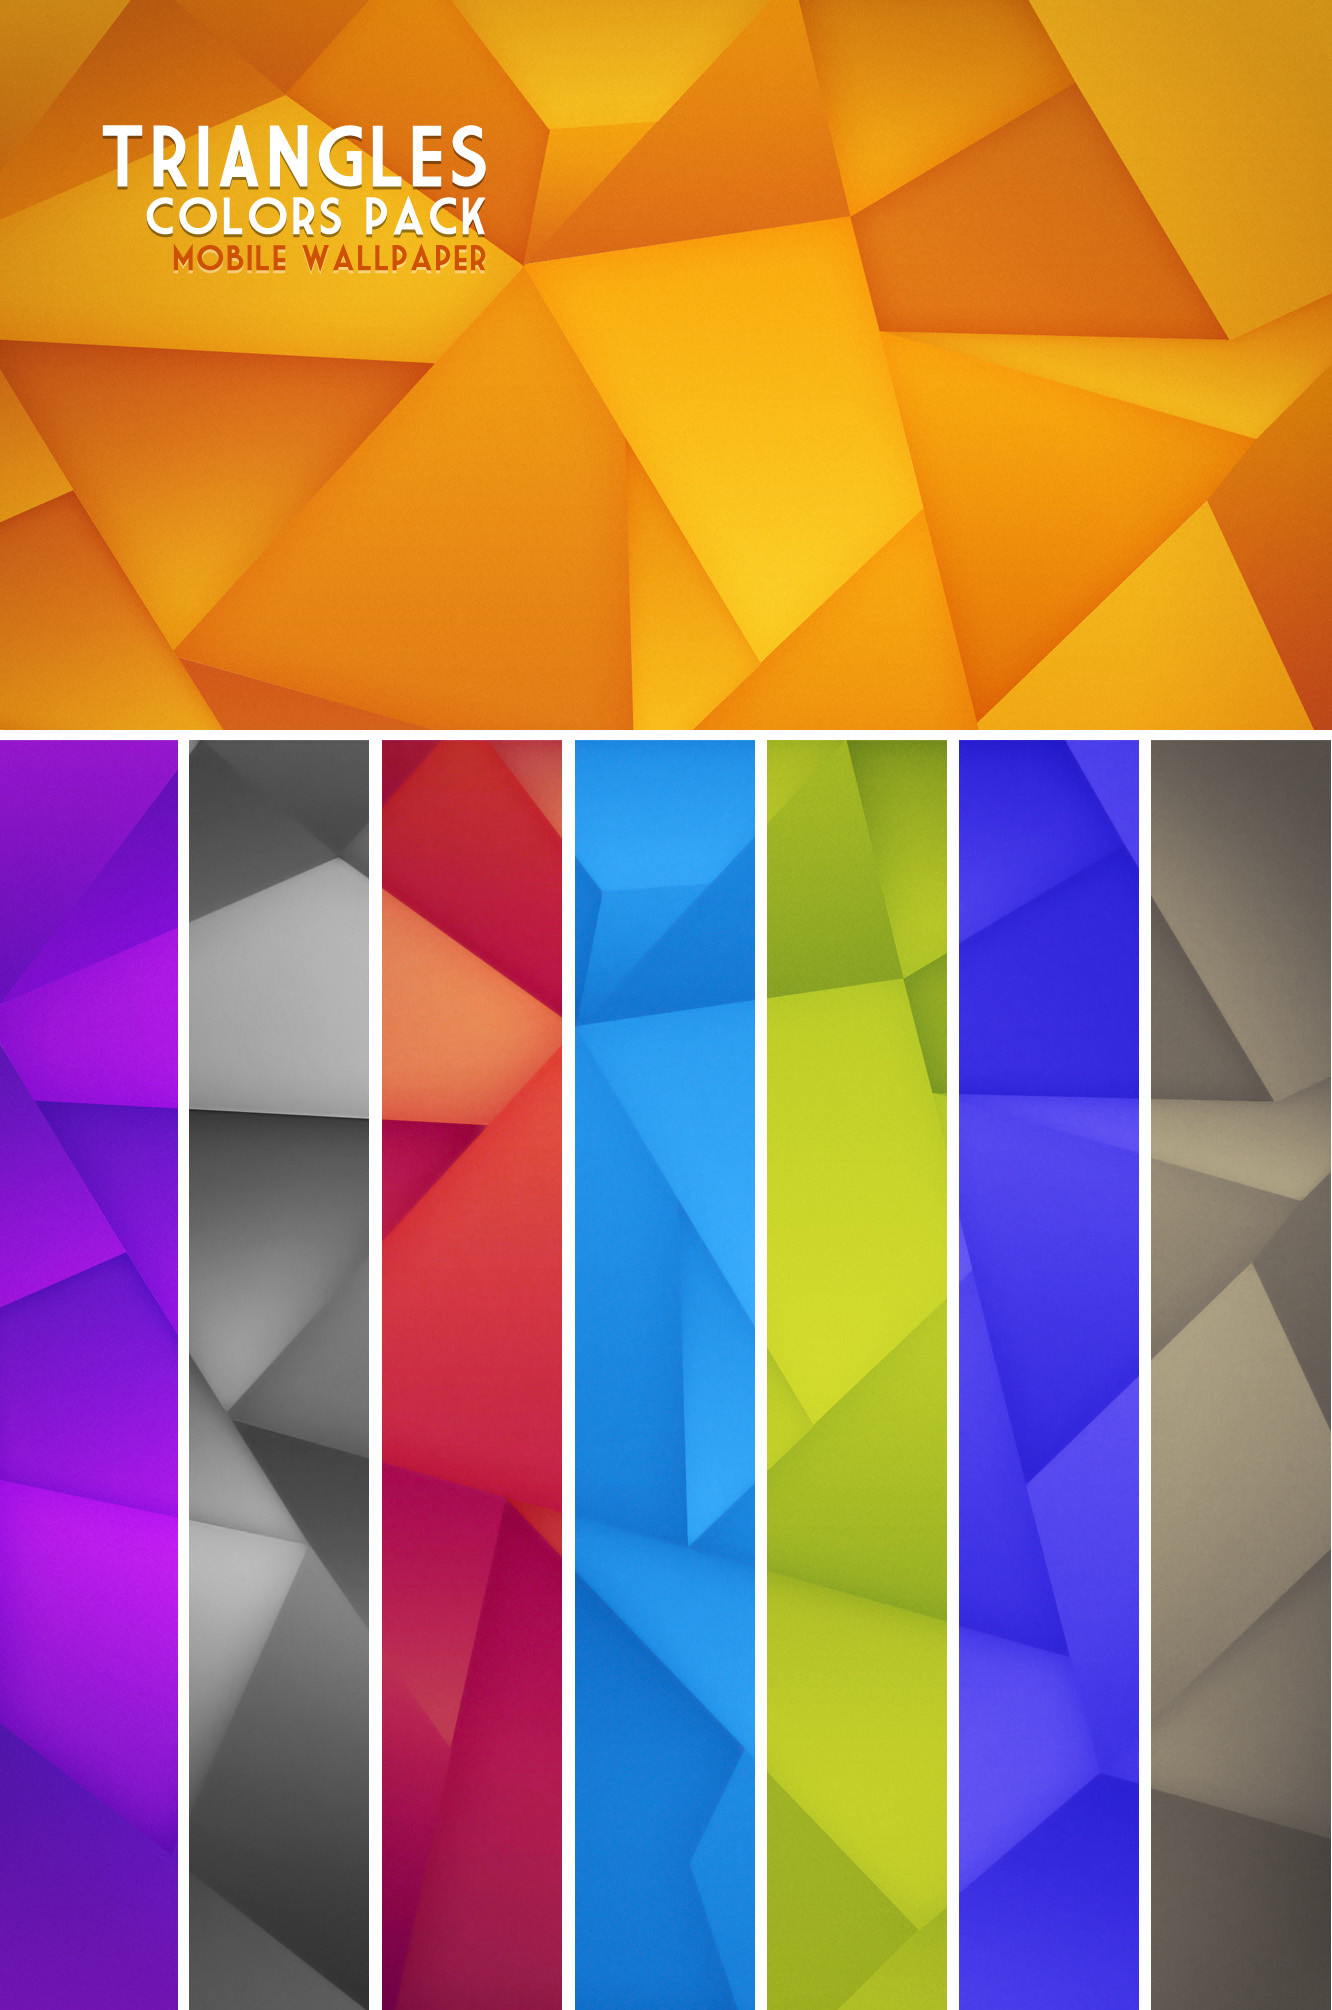 1332x2010 Triangles Mobile Wallpaper Colors Pack By Martz90 On DeviantArt